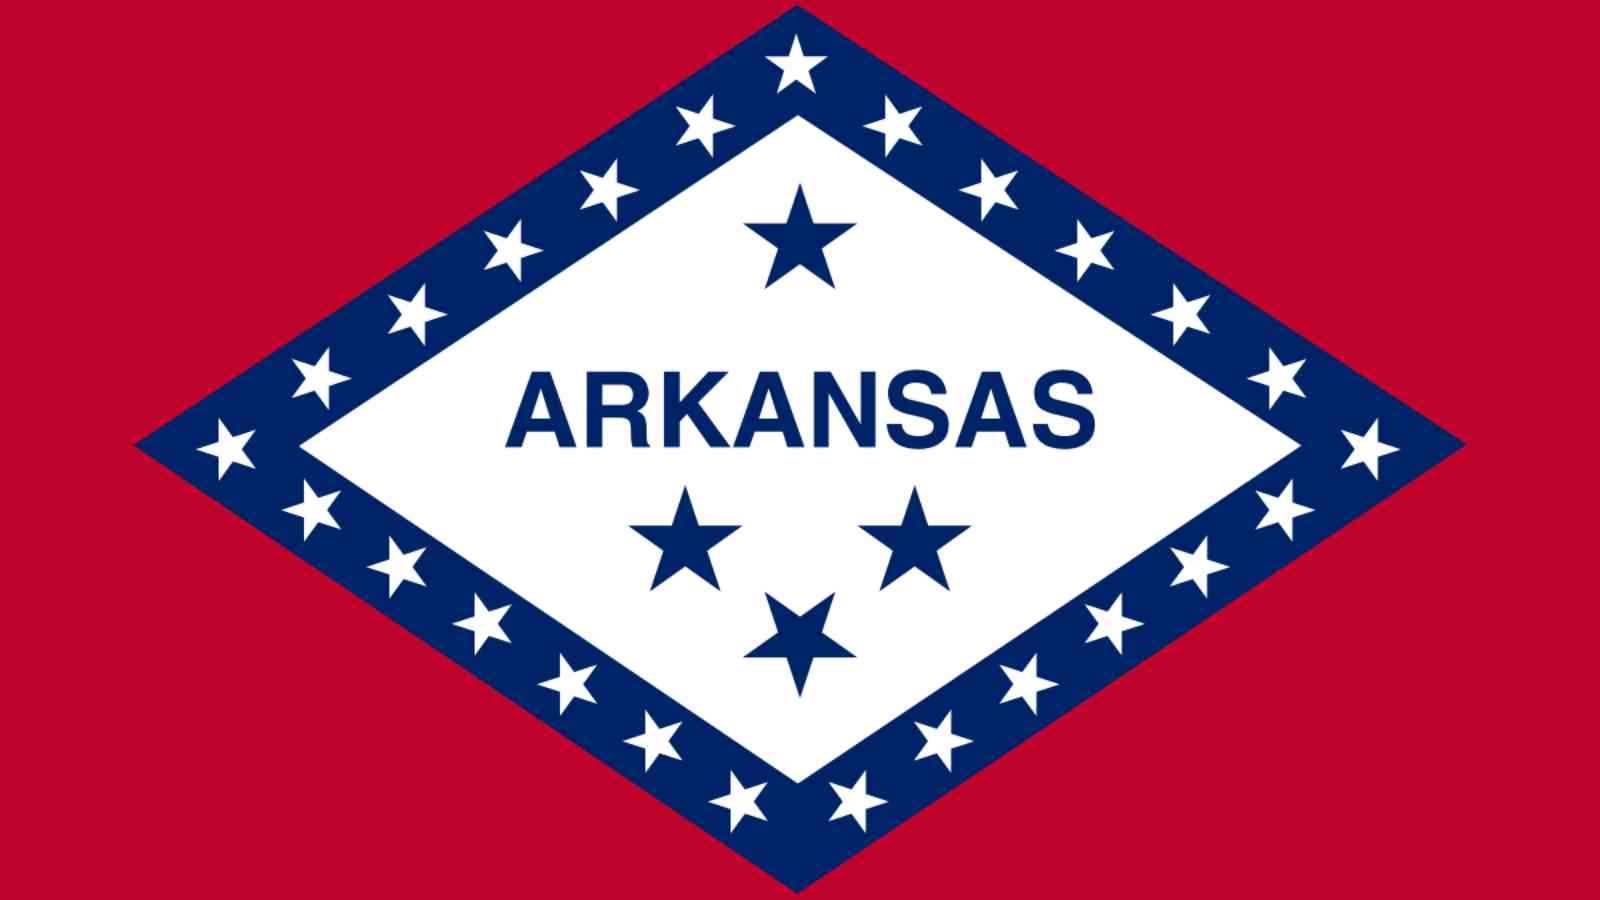 National Arkansas Day 2023: Date, History and Things to do in Arkansas